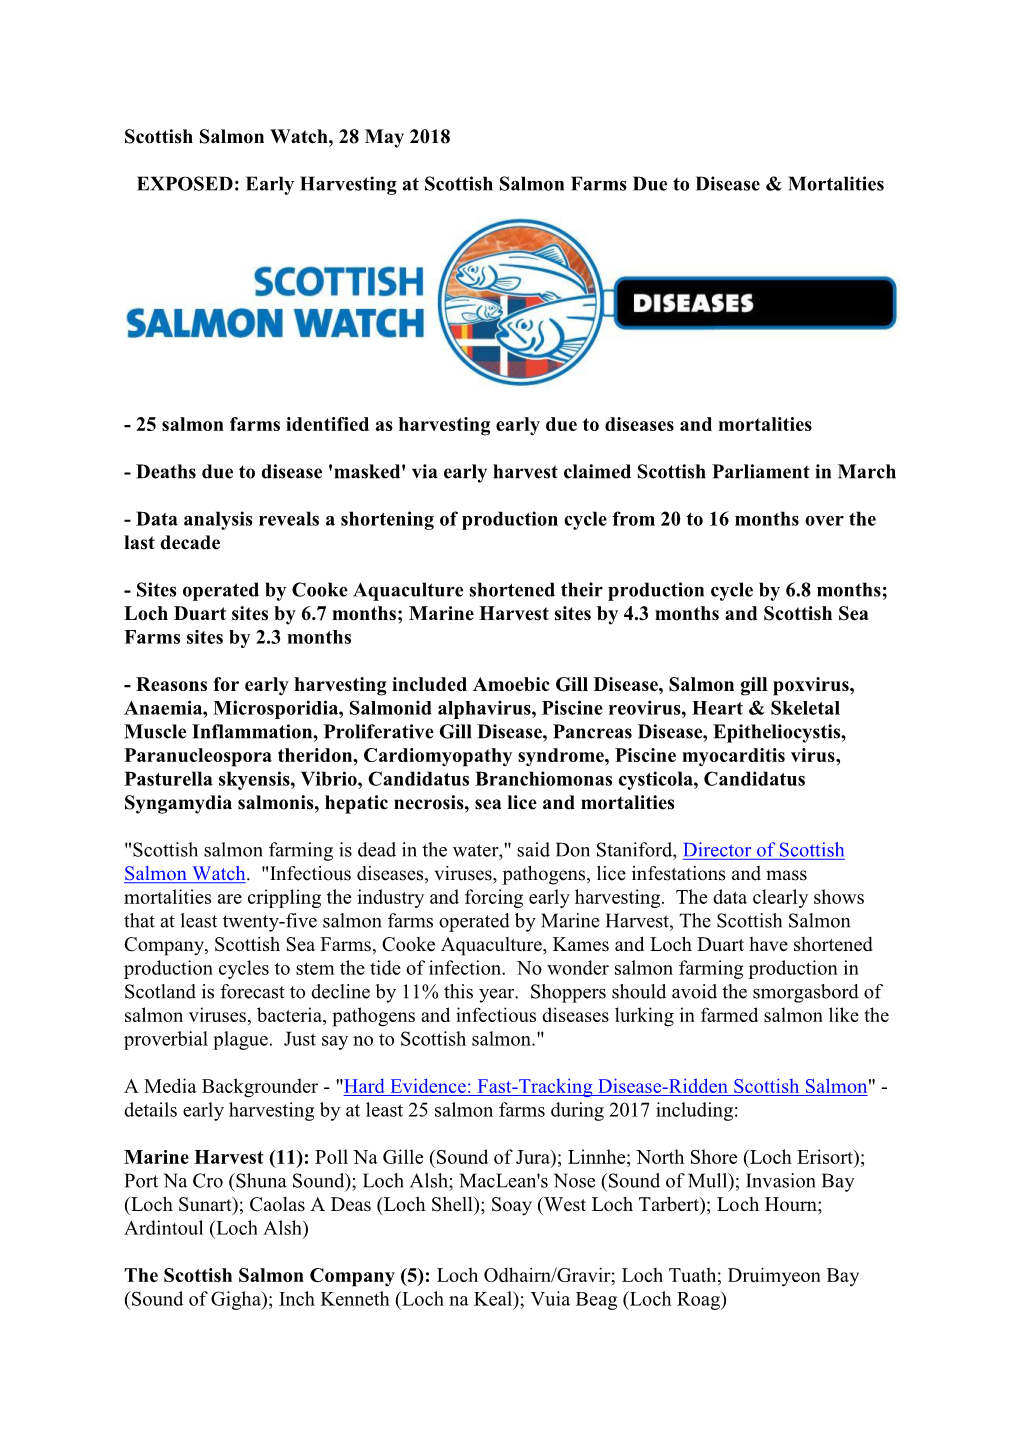 Early Harvesting at Scottish Salmon Farms Due to Disease & Mortalities